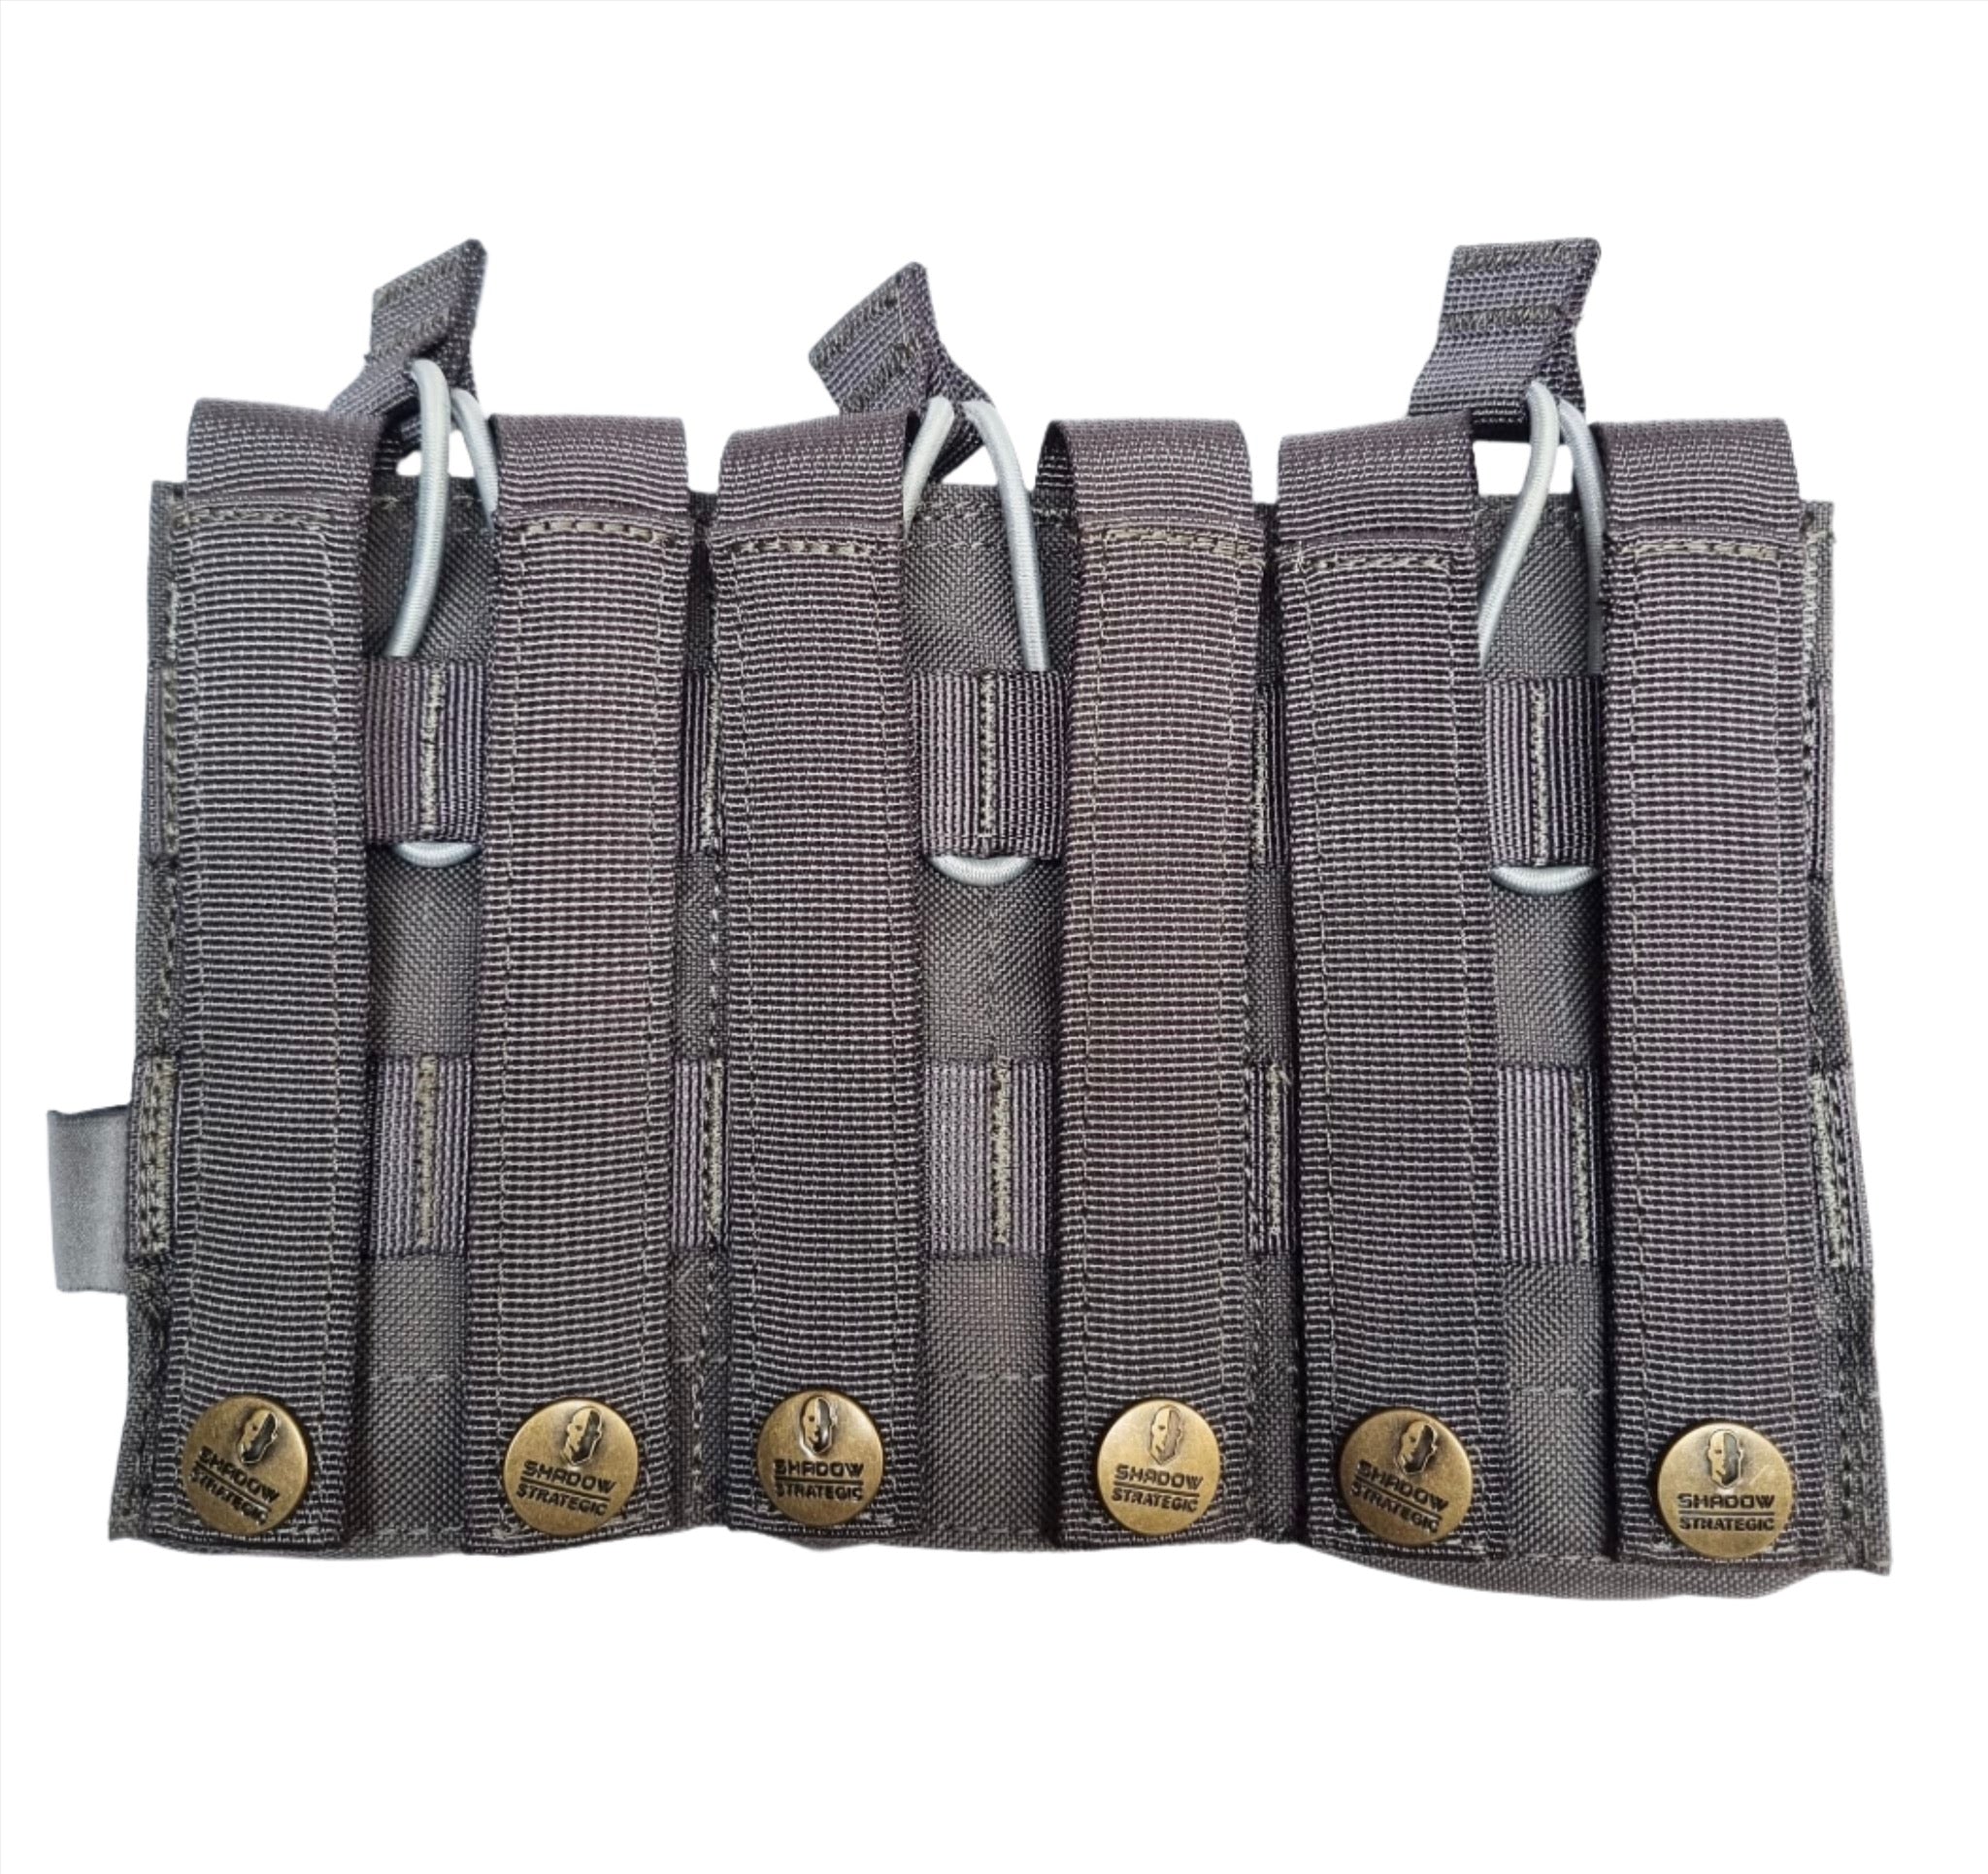 SHS - 23002 STACKER OPEN-TOP MAG POUCH TRIPLE SILVER GREY